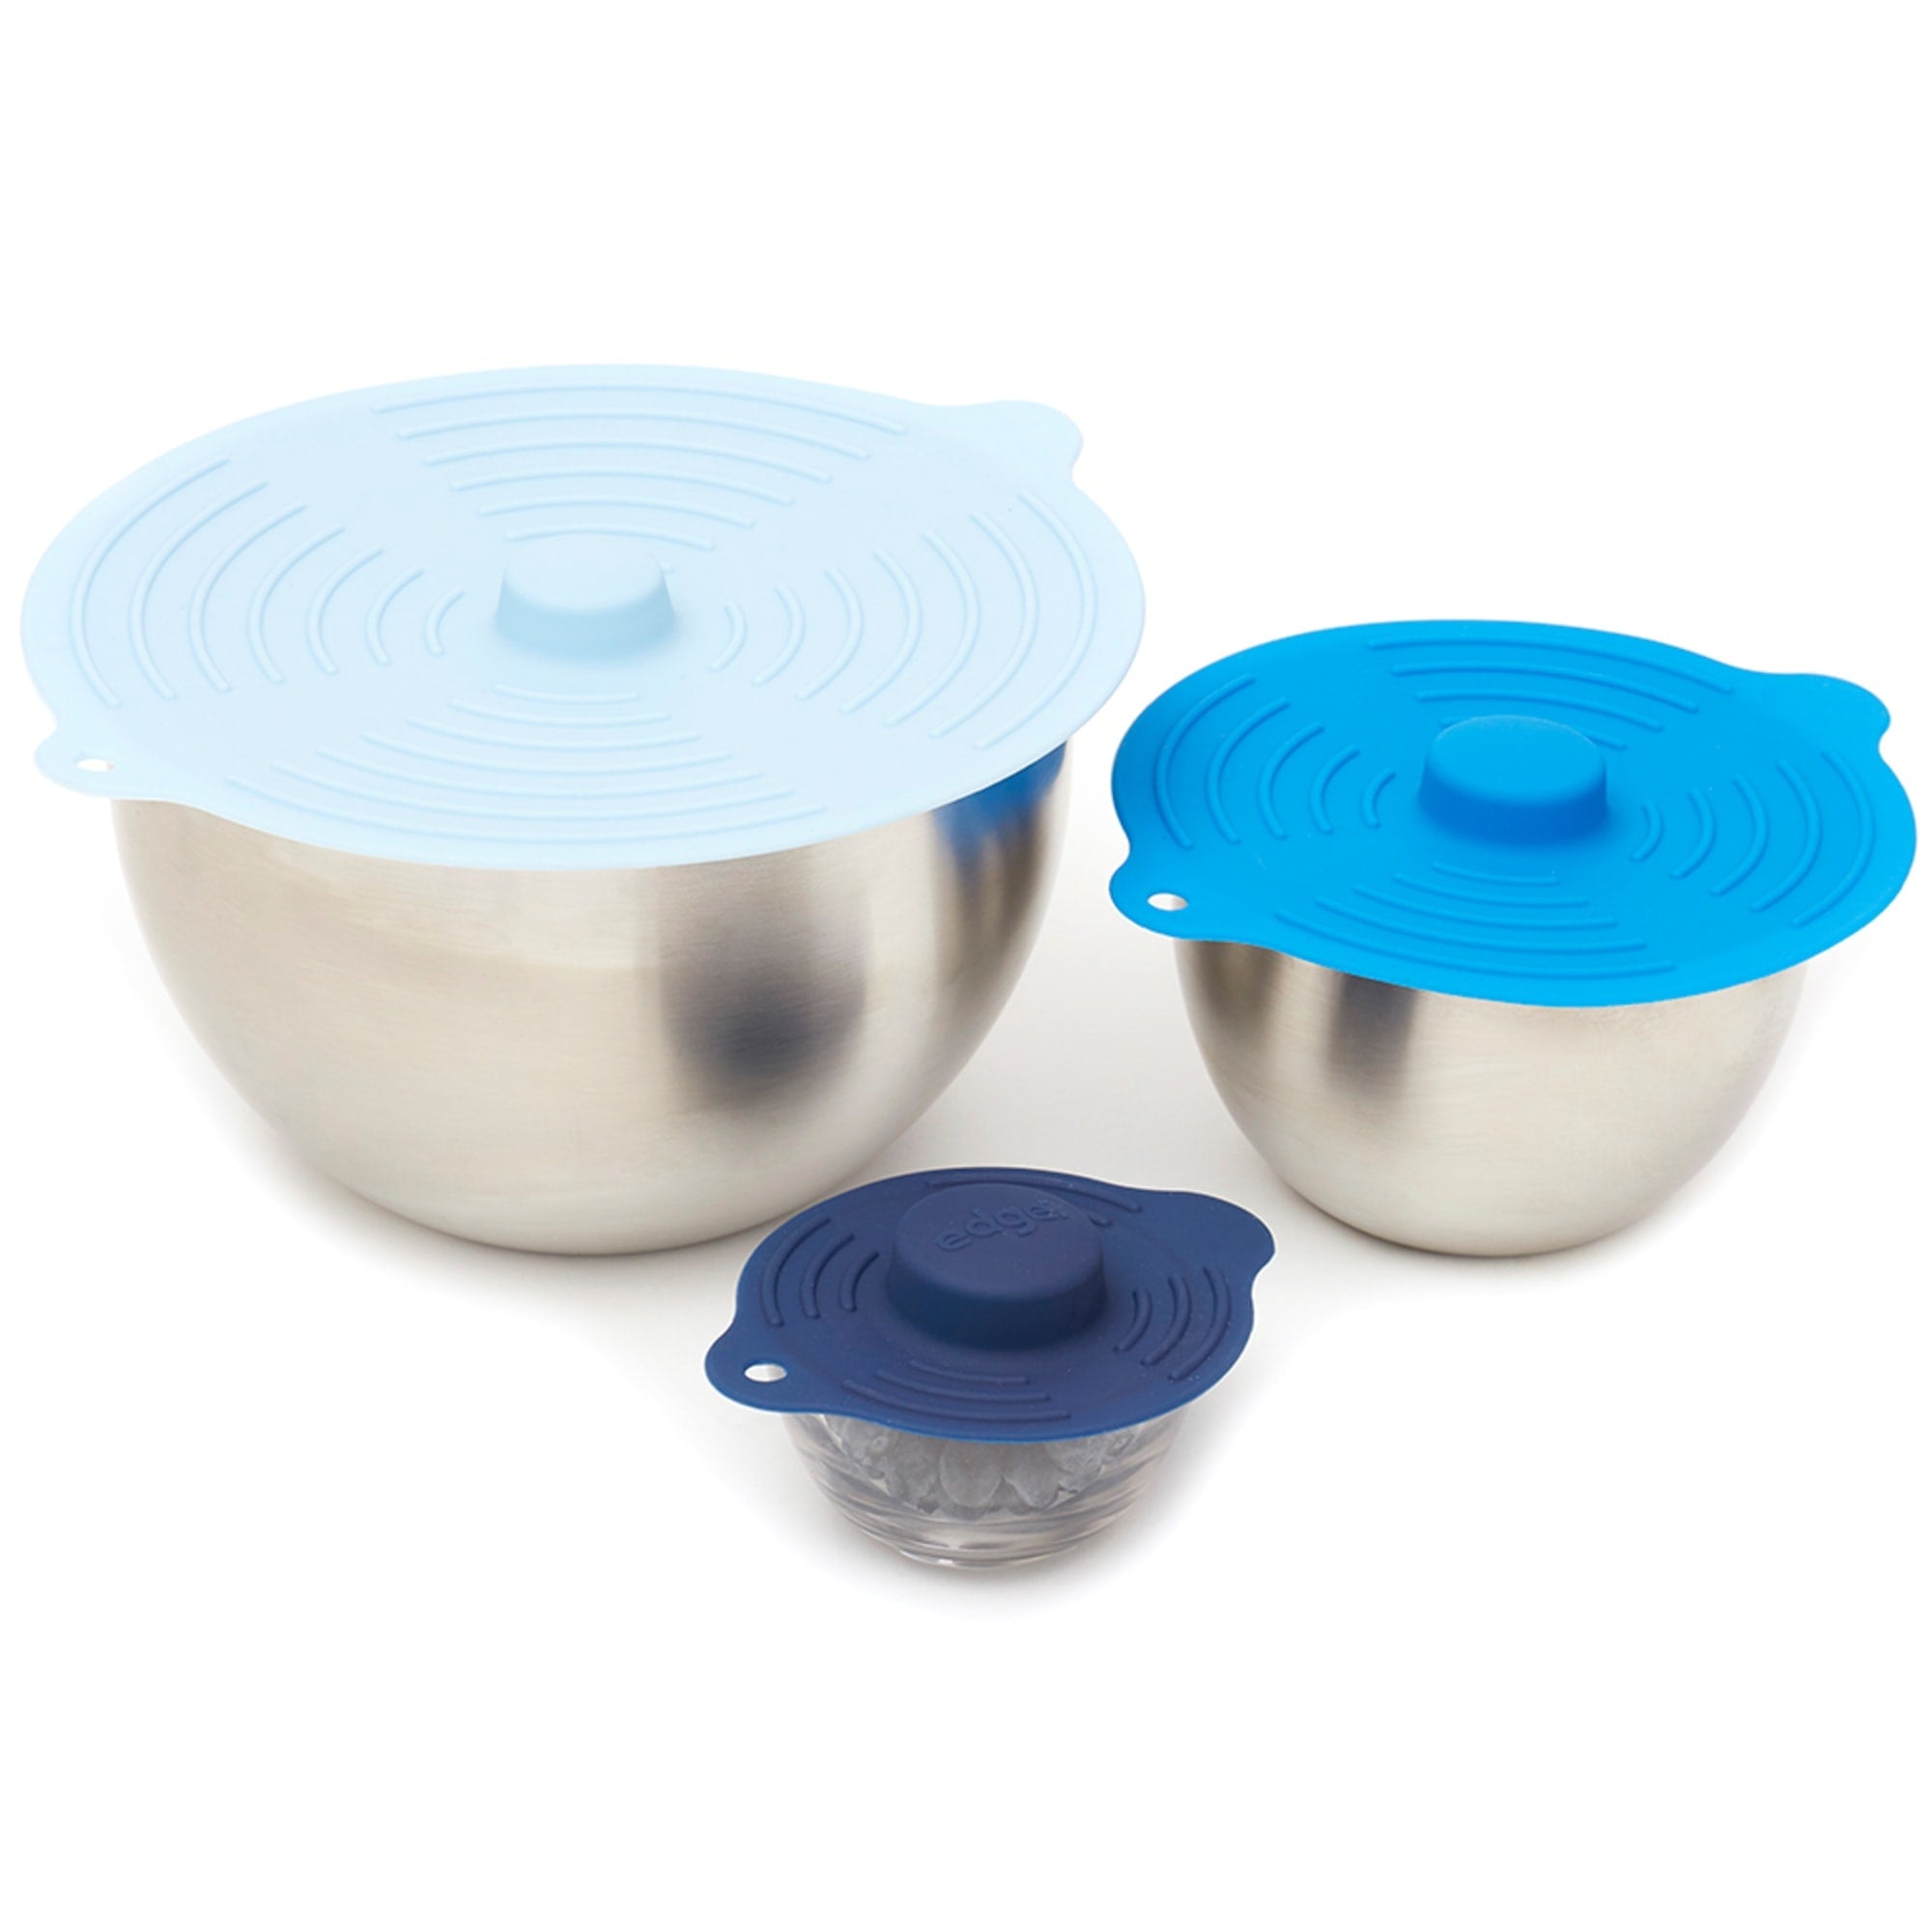 Home Basics Silicone Lids $6.00 EACH, CASE PACK OF 12